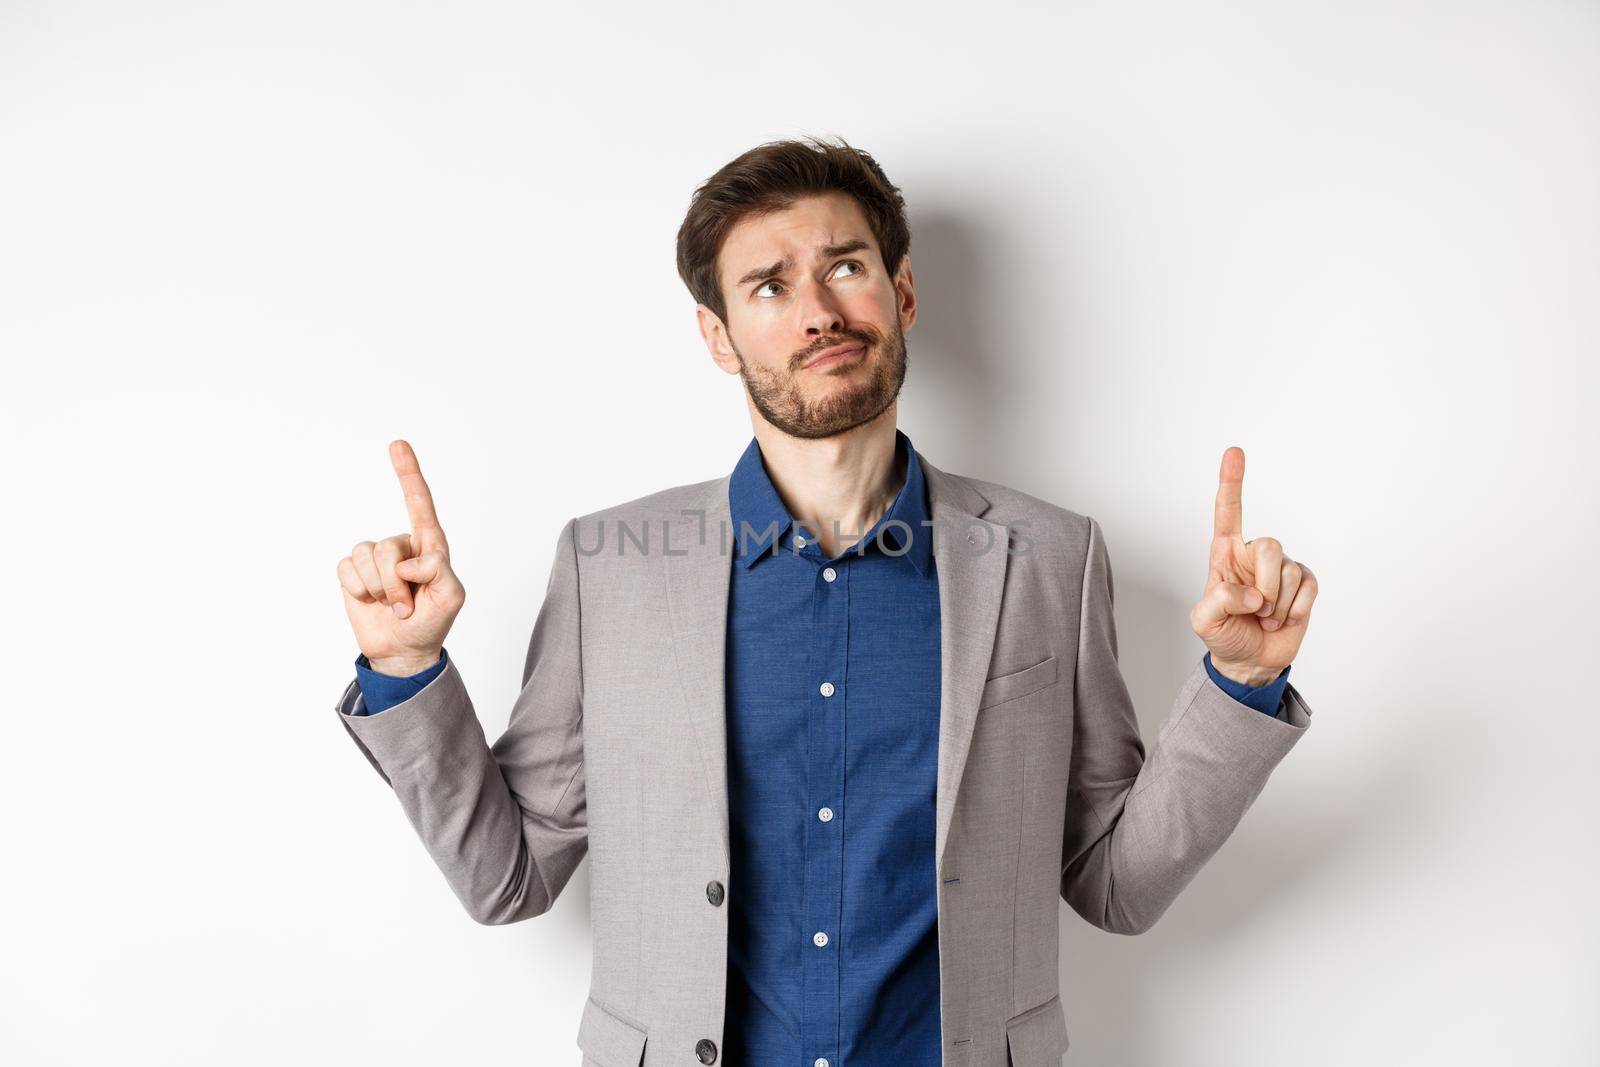 Skeptical and hesitant young businessman in suit looking up with disappointed smirk, feel unsure about deal, standing dissatisfied on white background.